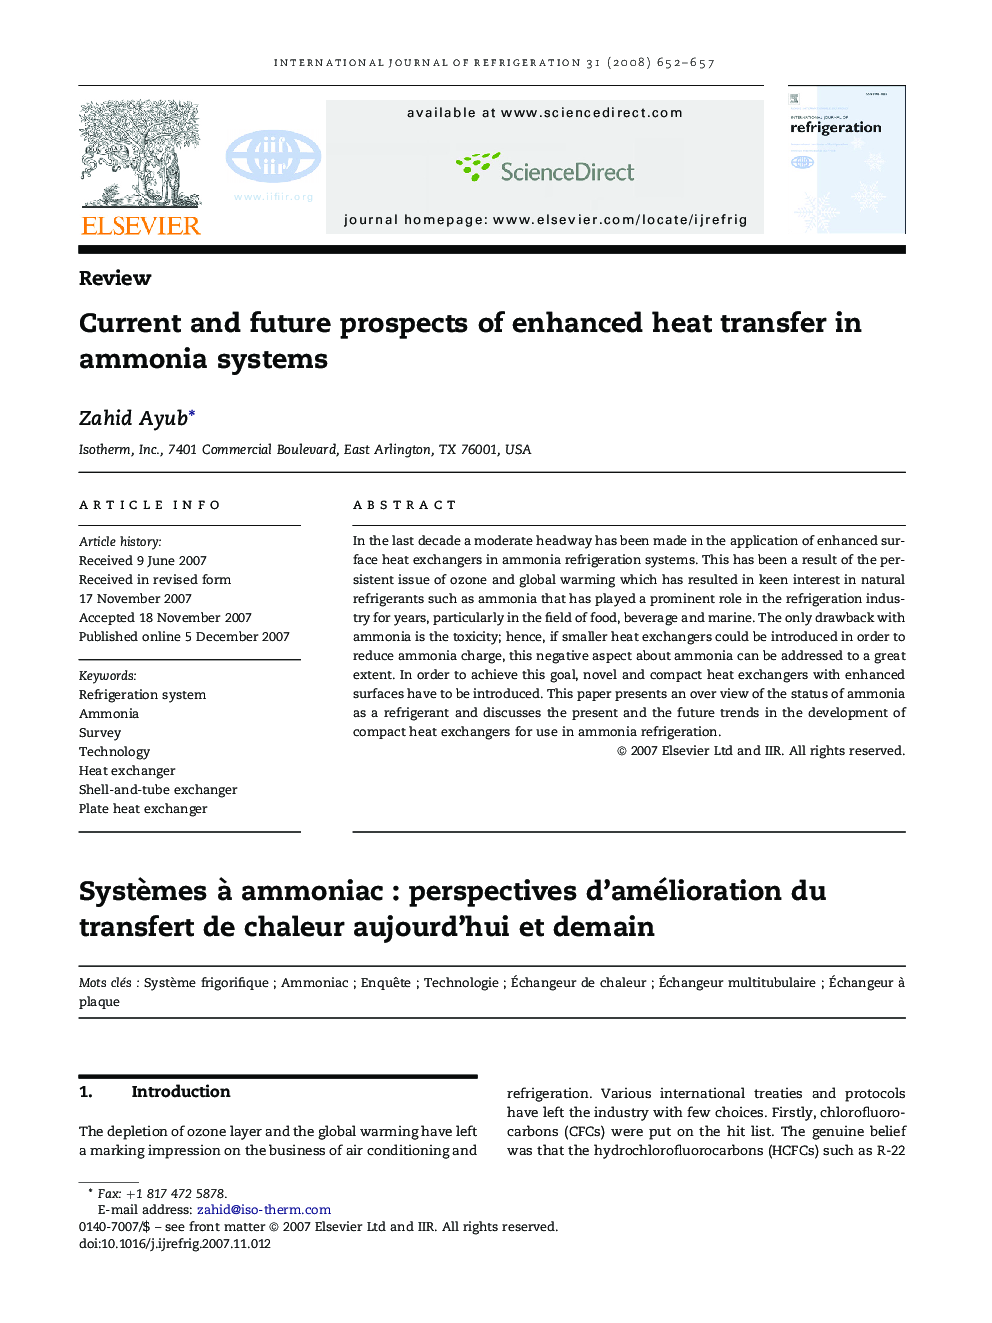 Current and future prospects of enhanced heat transfer in ammonia systems